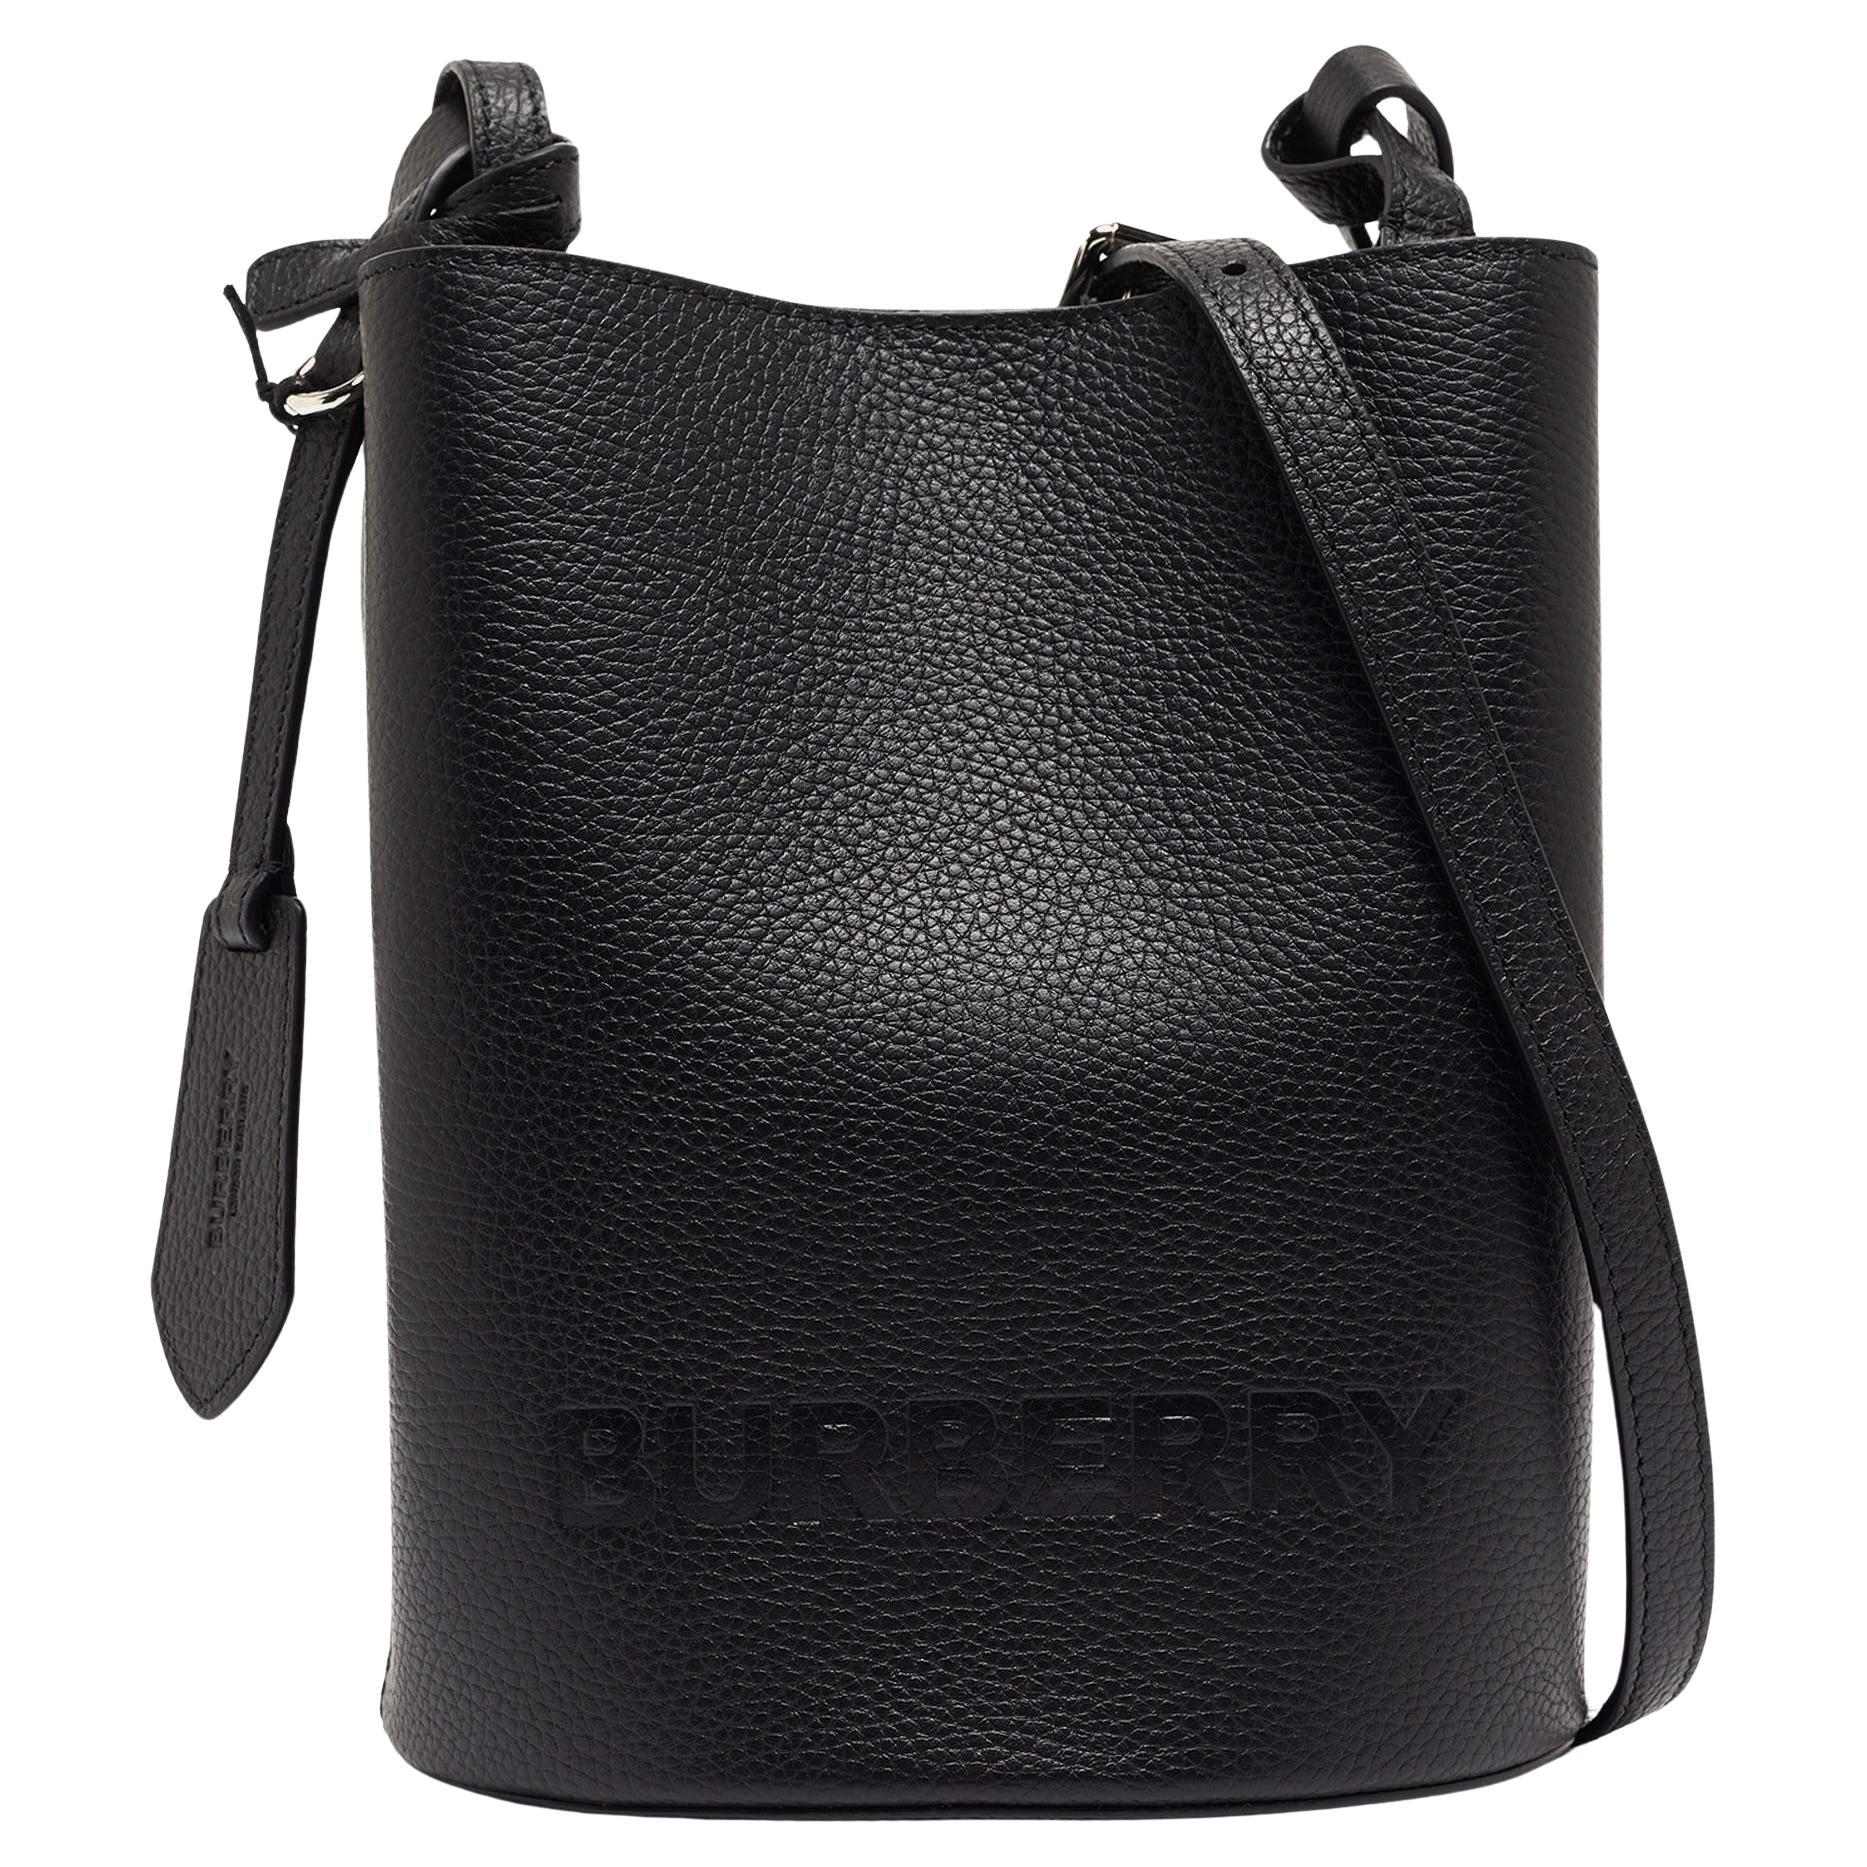 Burberry Black Leather Small Lorne Bucket Bag For Sale